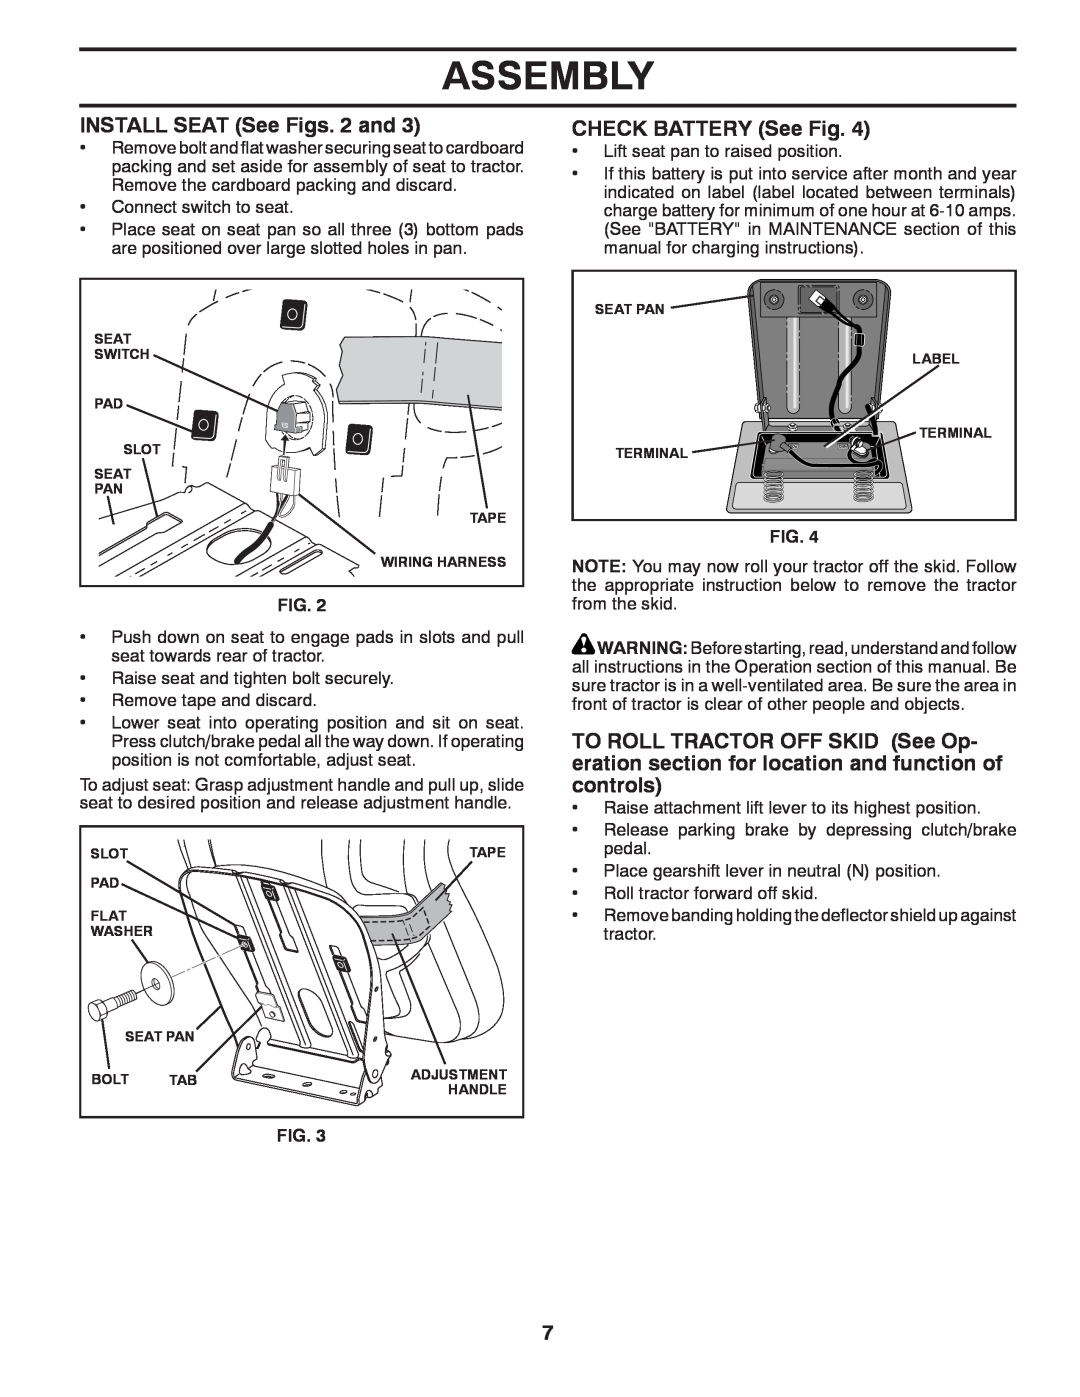 Poulan 96042003505 manual Assembly, INSTALL SEAT See Figs. 2 and, CHECK BATTERY See Fig 